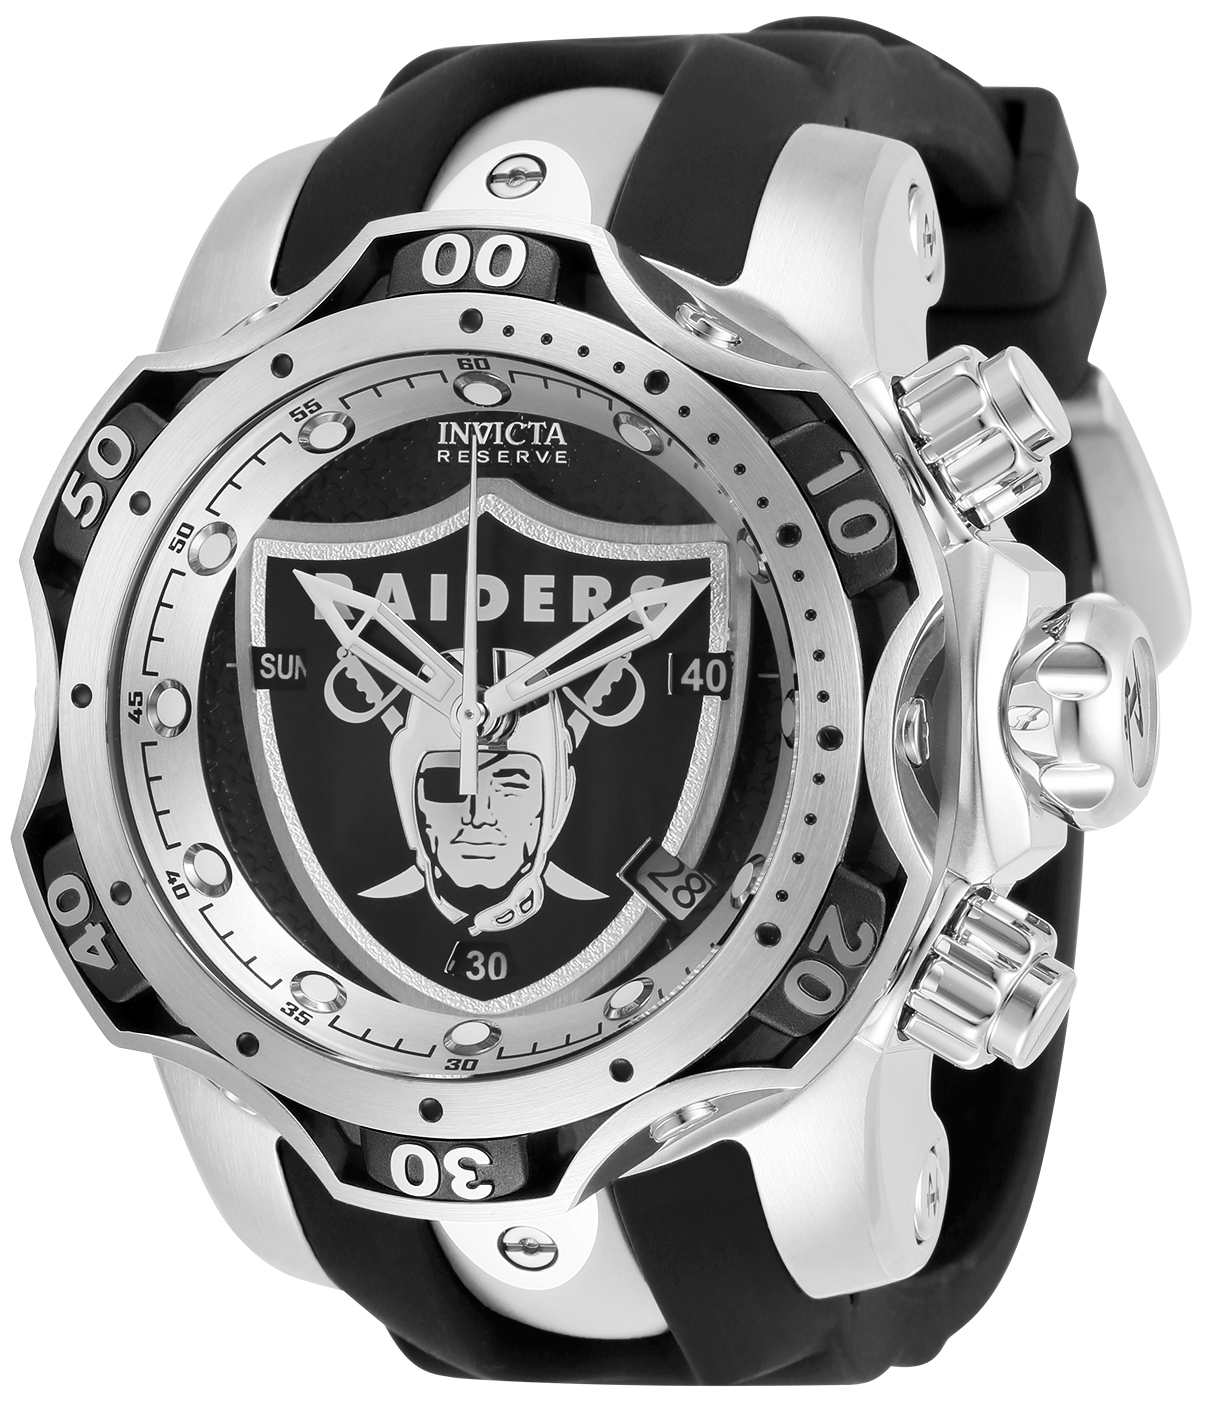  Raiders Watches For Men